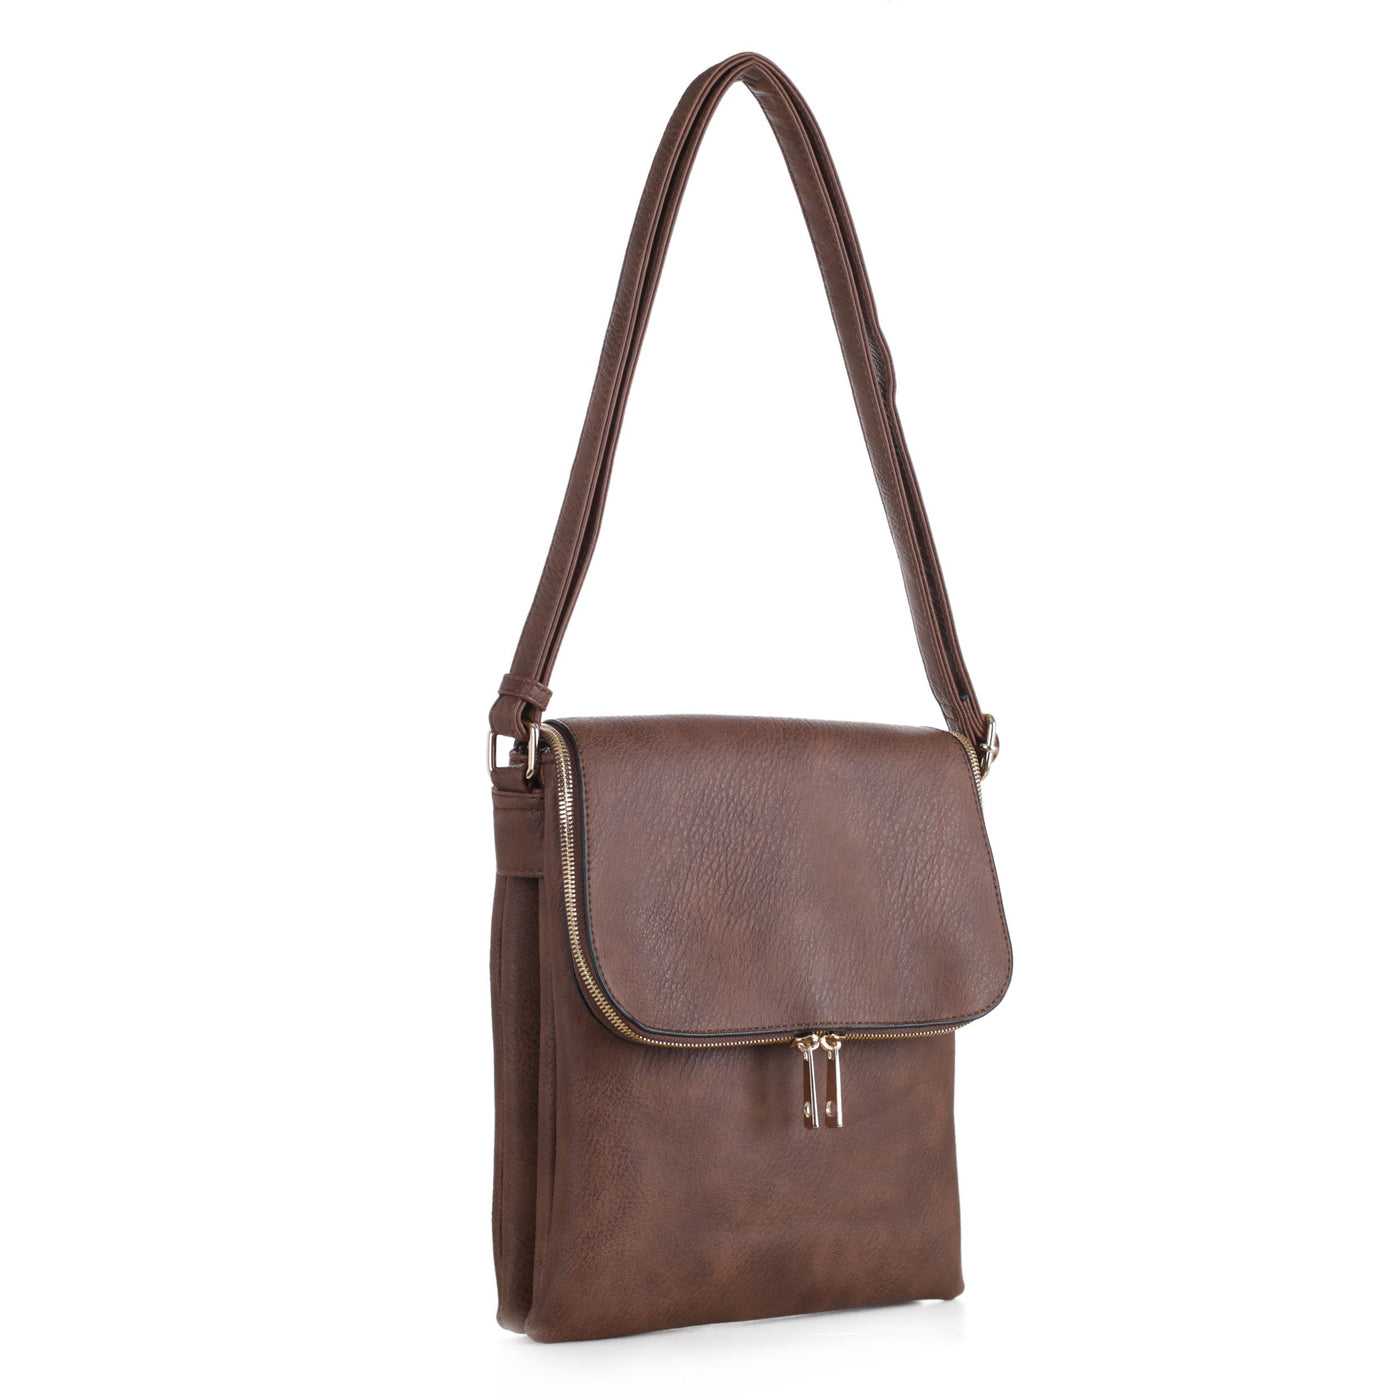 Cheyanne Concealed Carry Crossbody with Lock and Key - JessieJames Handbags